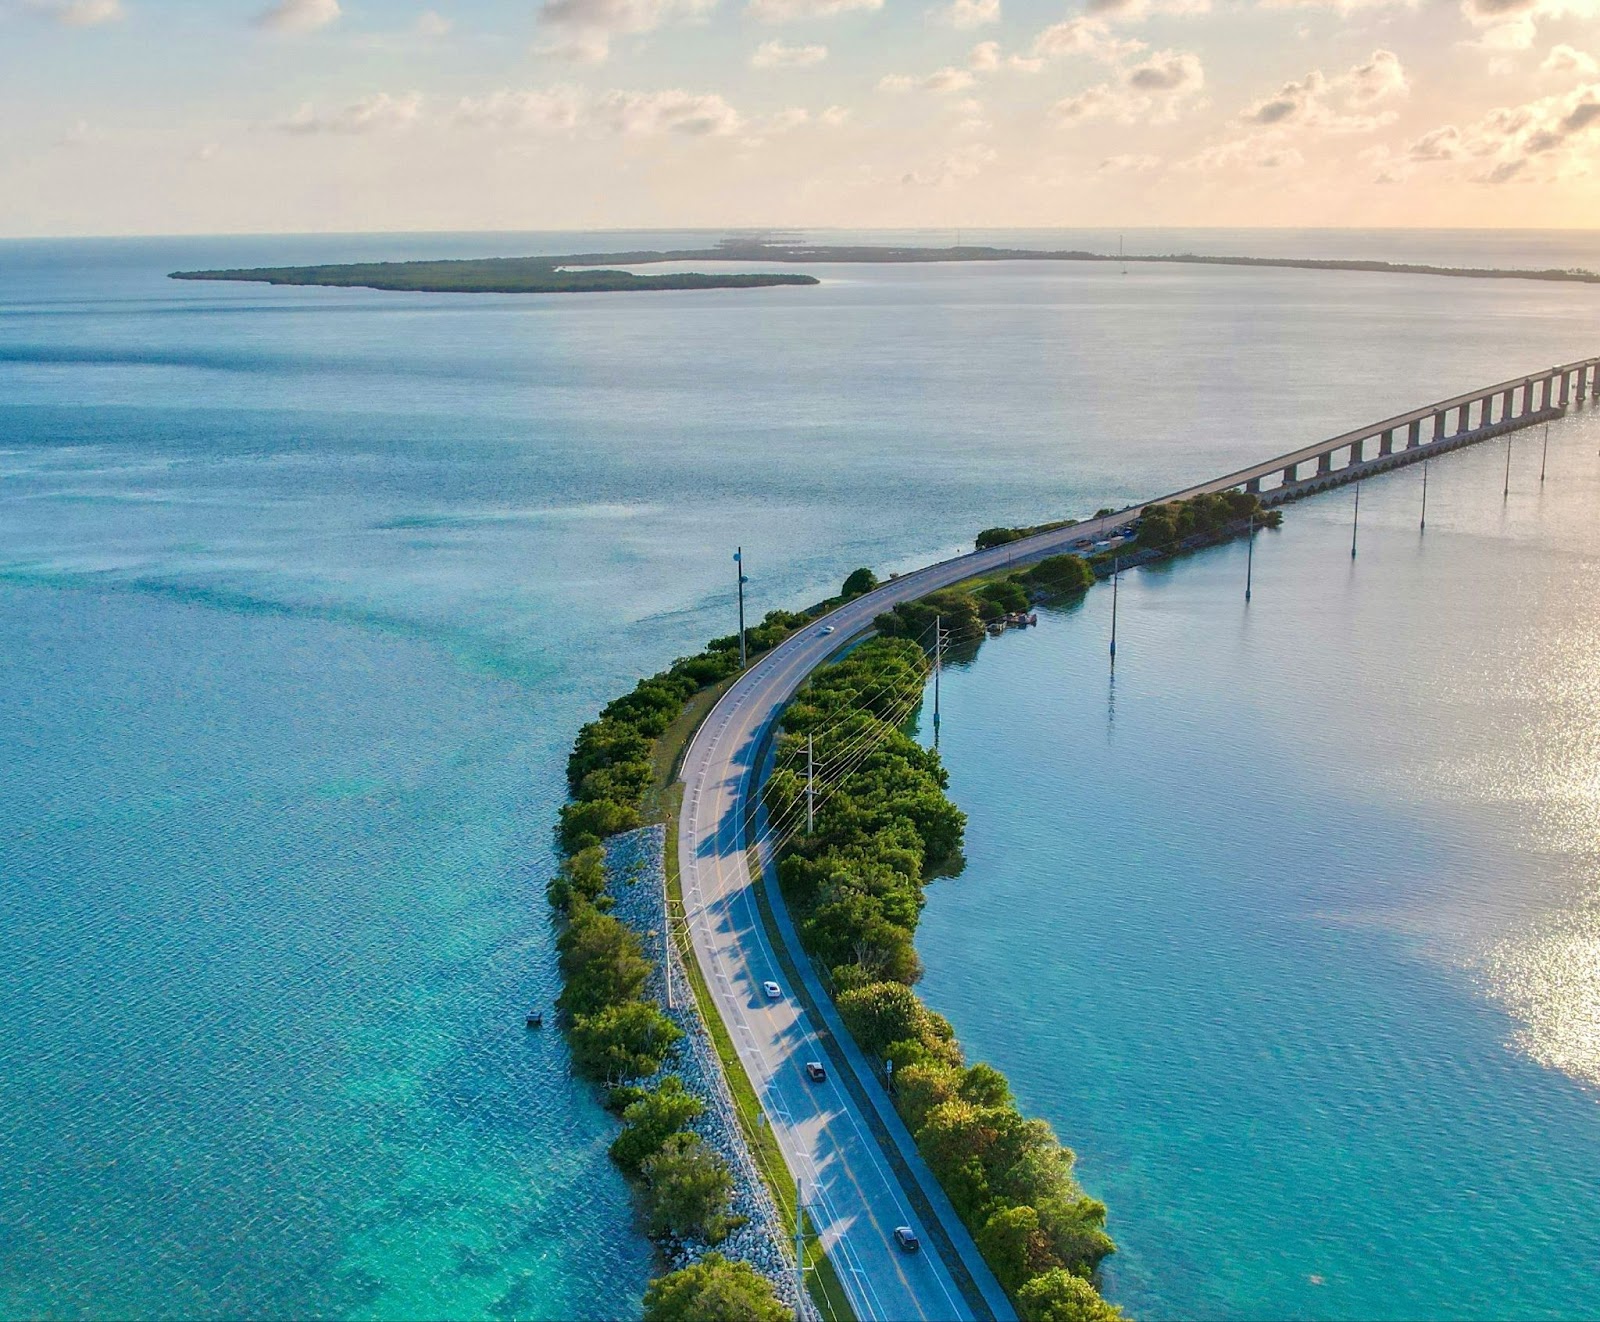 This scenic highway is a reason that April is the best time to visit the Florida Keys.
pictured: the Overseas Highway